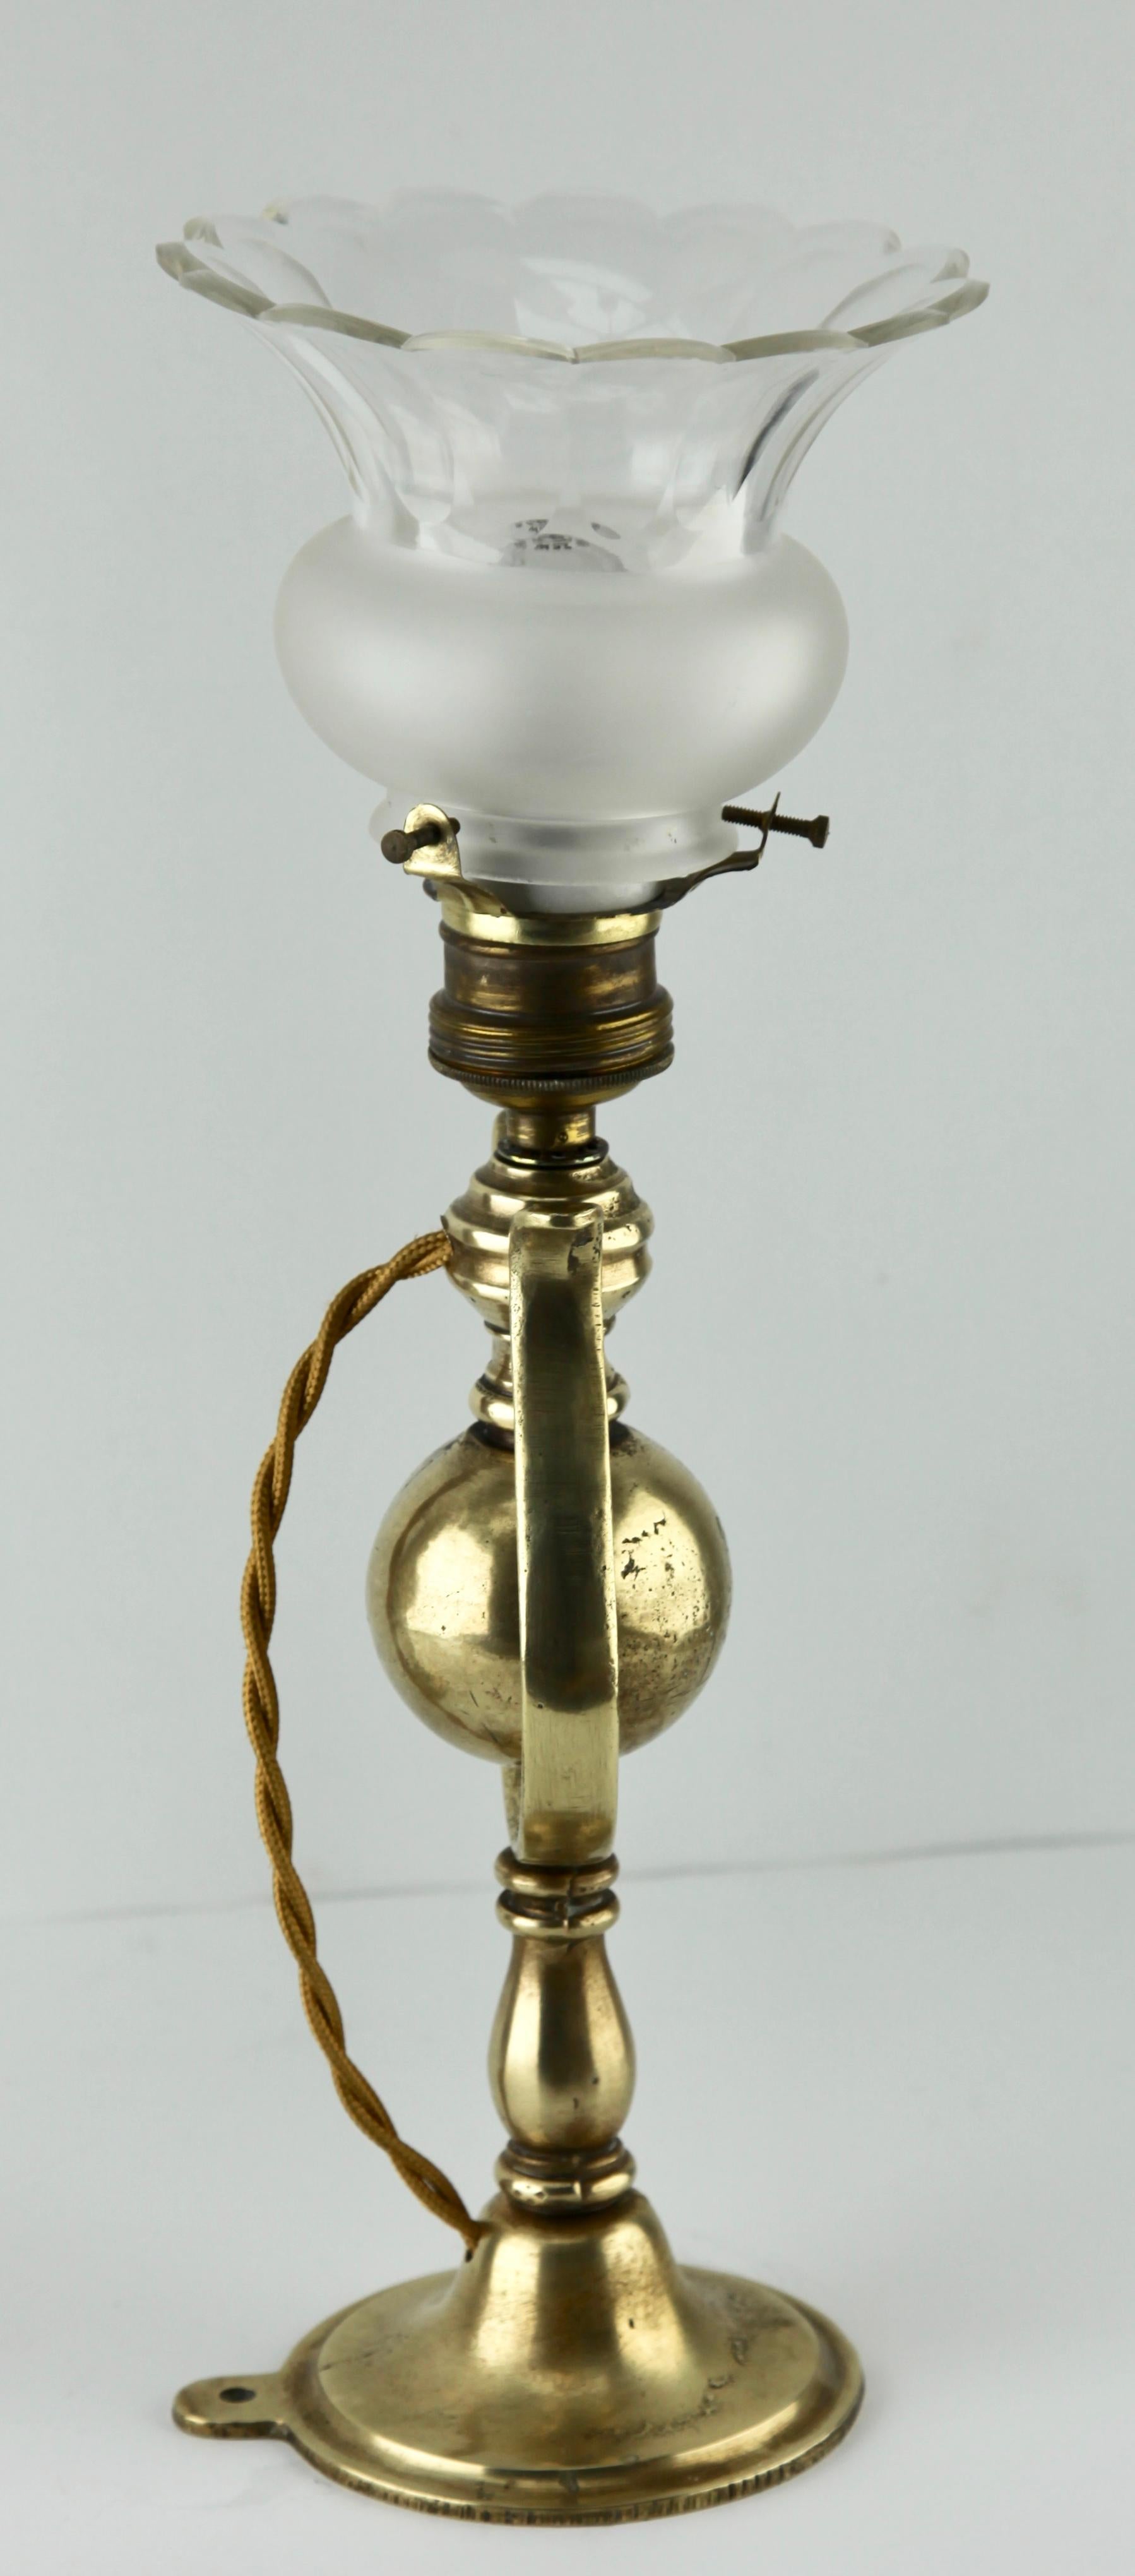 Faceted Period Brass Ship's Wall Lamp with Weighted Gimble and Milk-Glass Lampshade